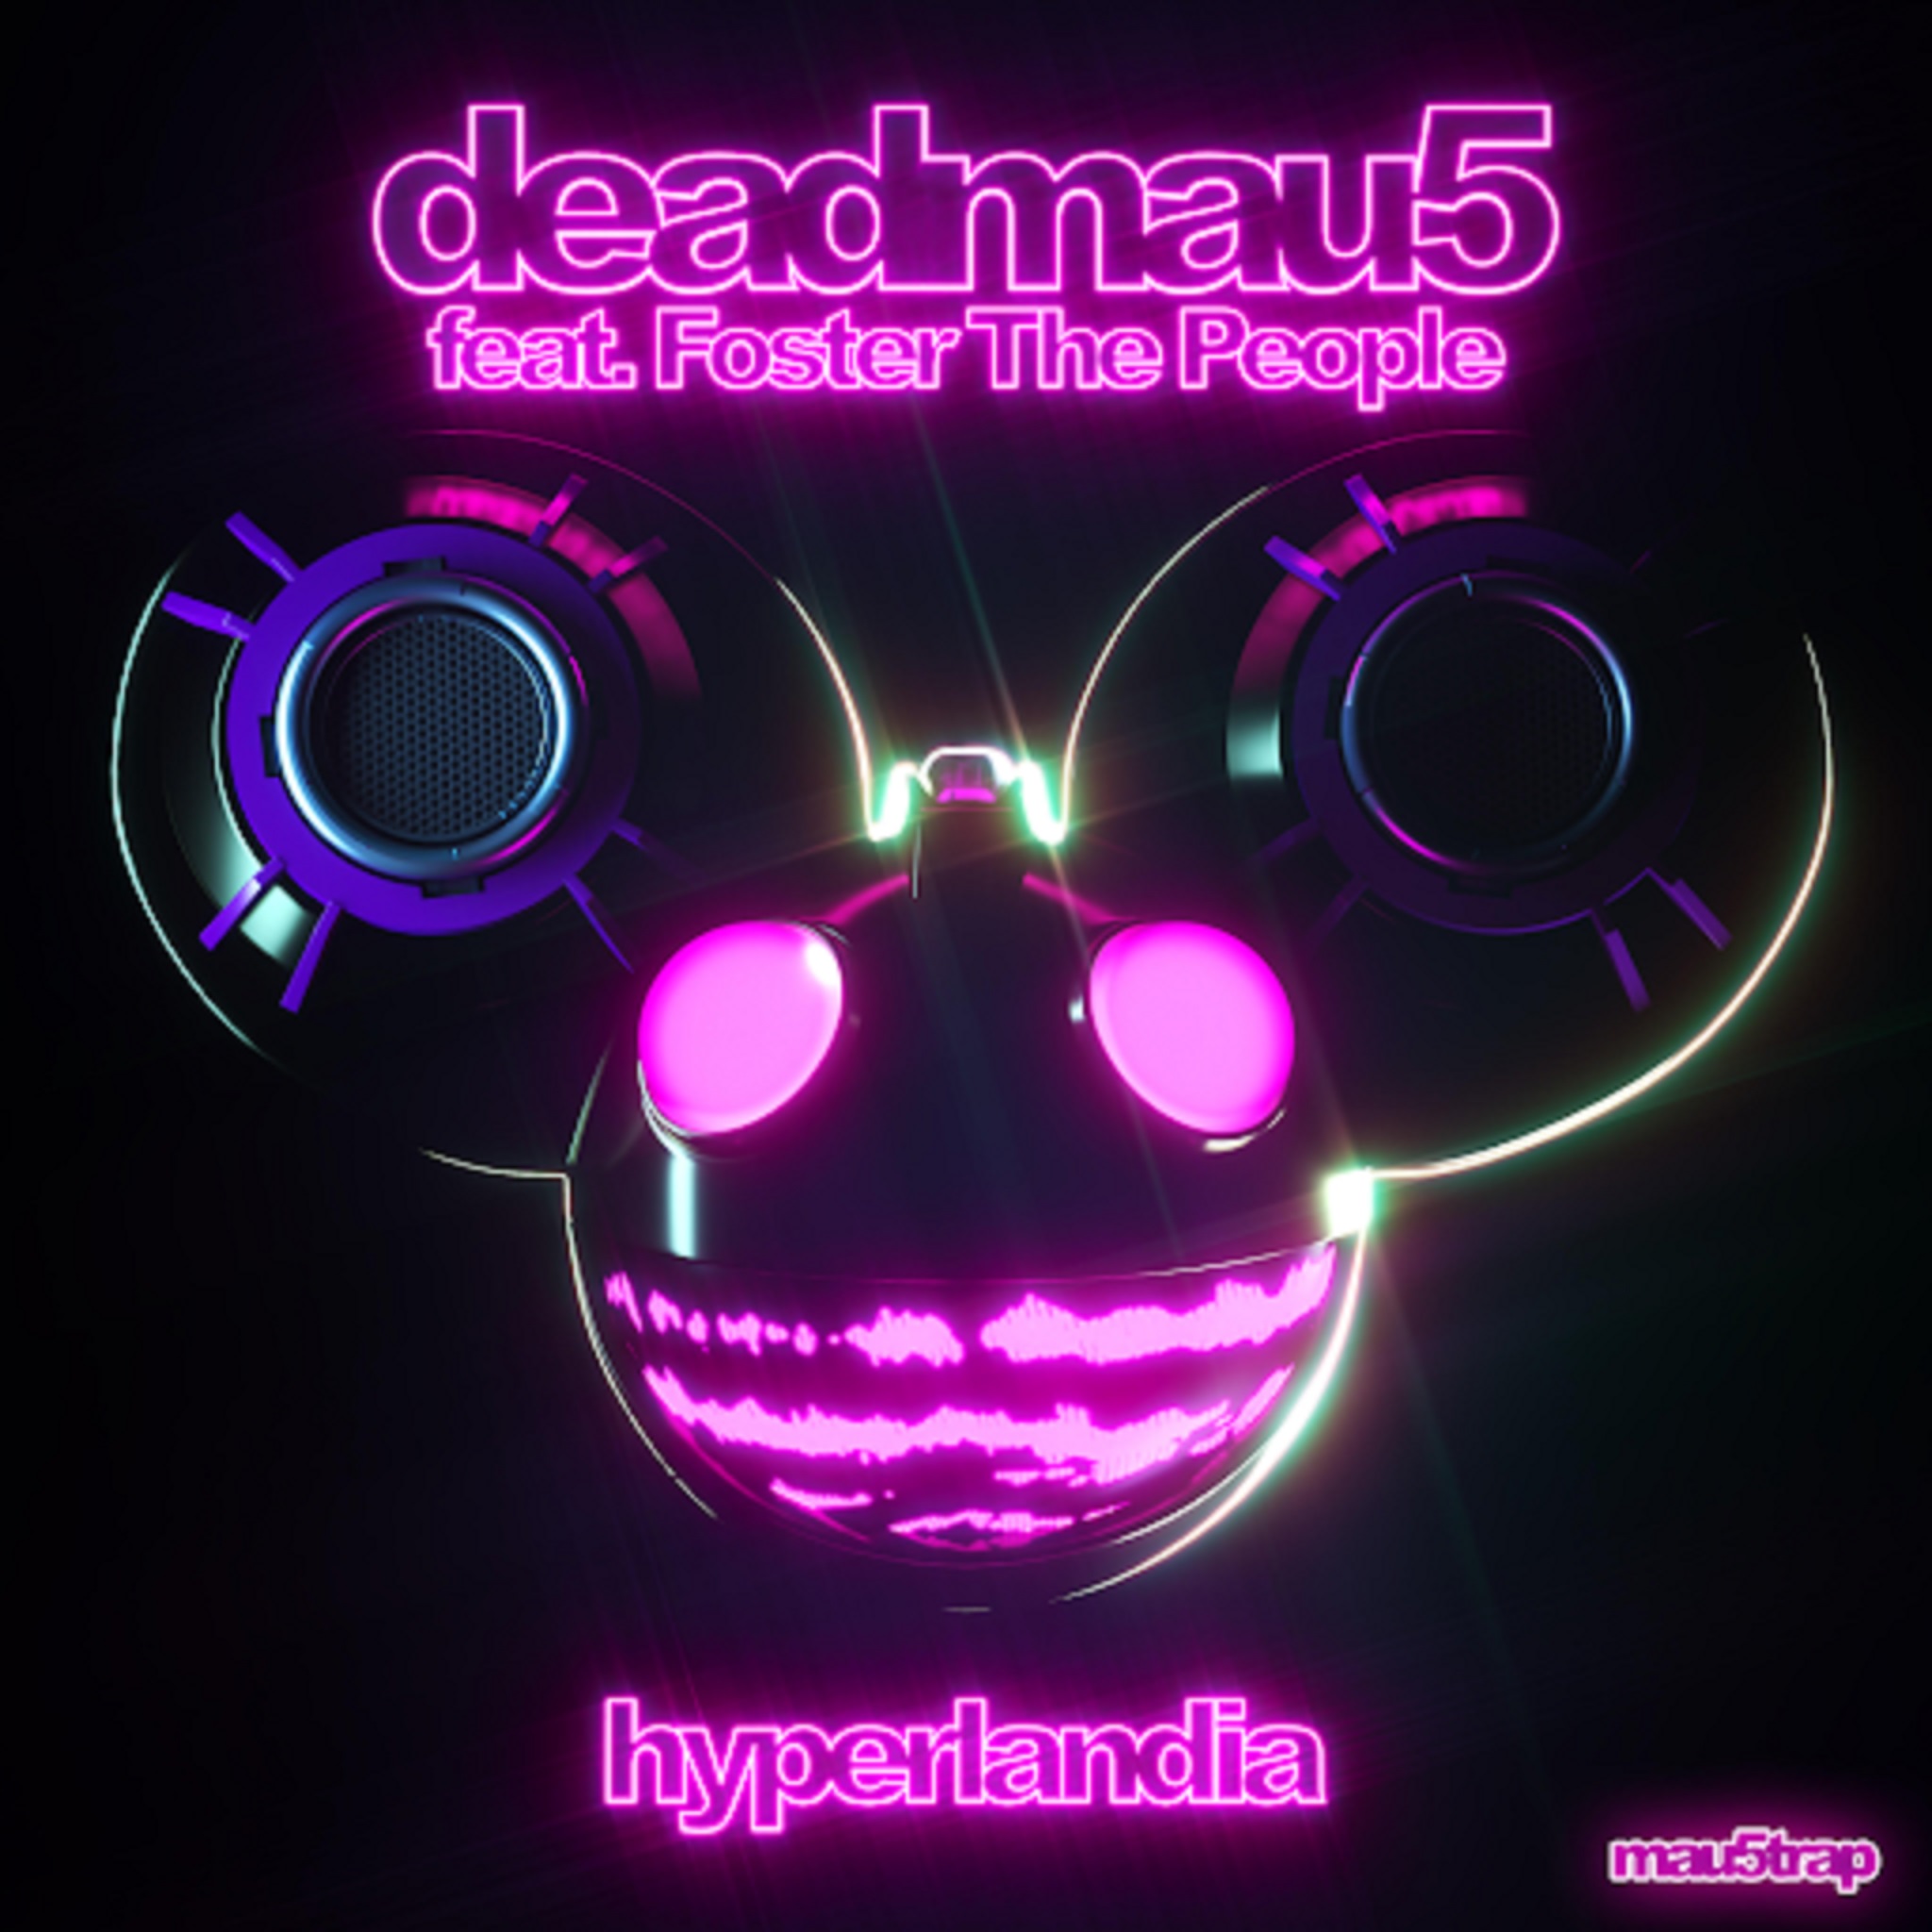 deadmau5 ft Foster The People 'Hyperlandia' 5-Track EP Out Now